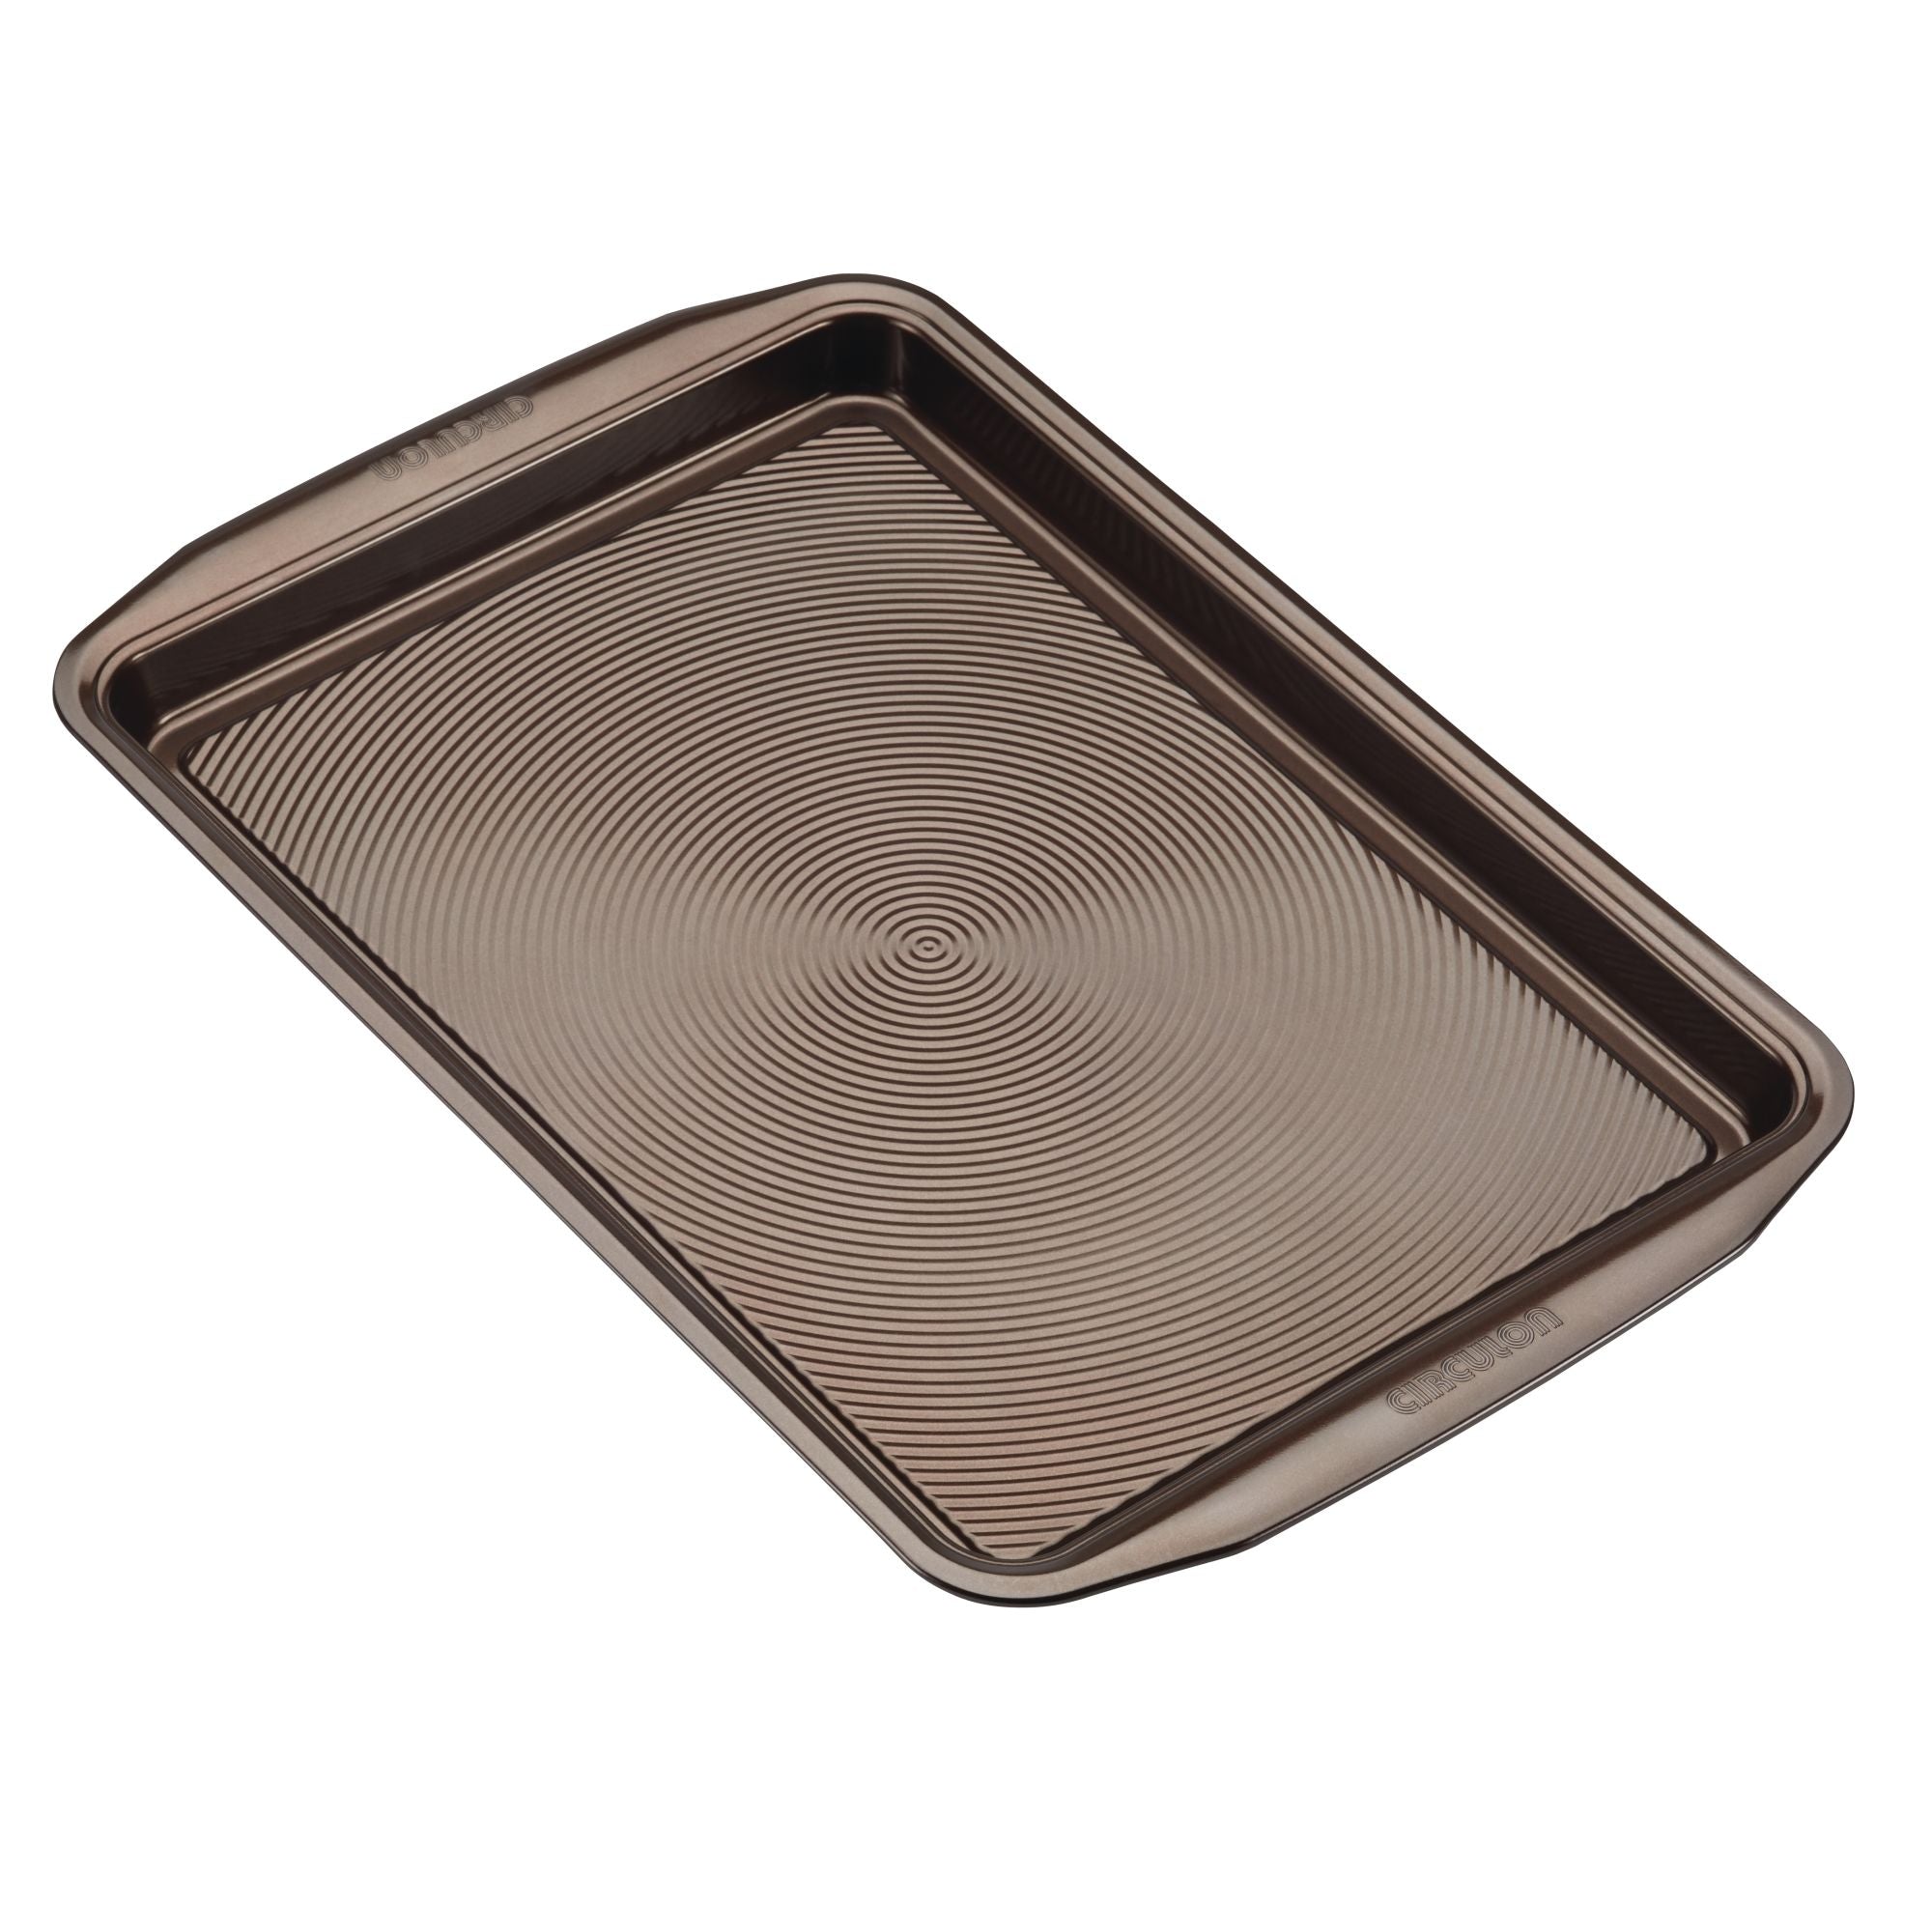 Circulon 47110 Nonstick Bakeware Set with Cookie and Cake Pans 3 Piece  Chocolate